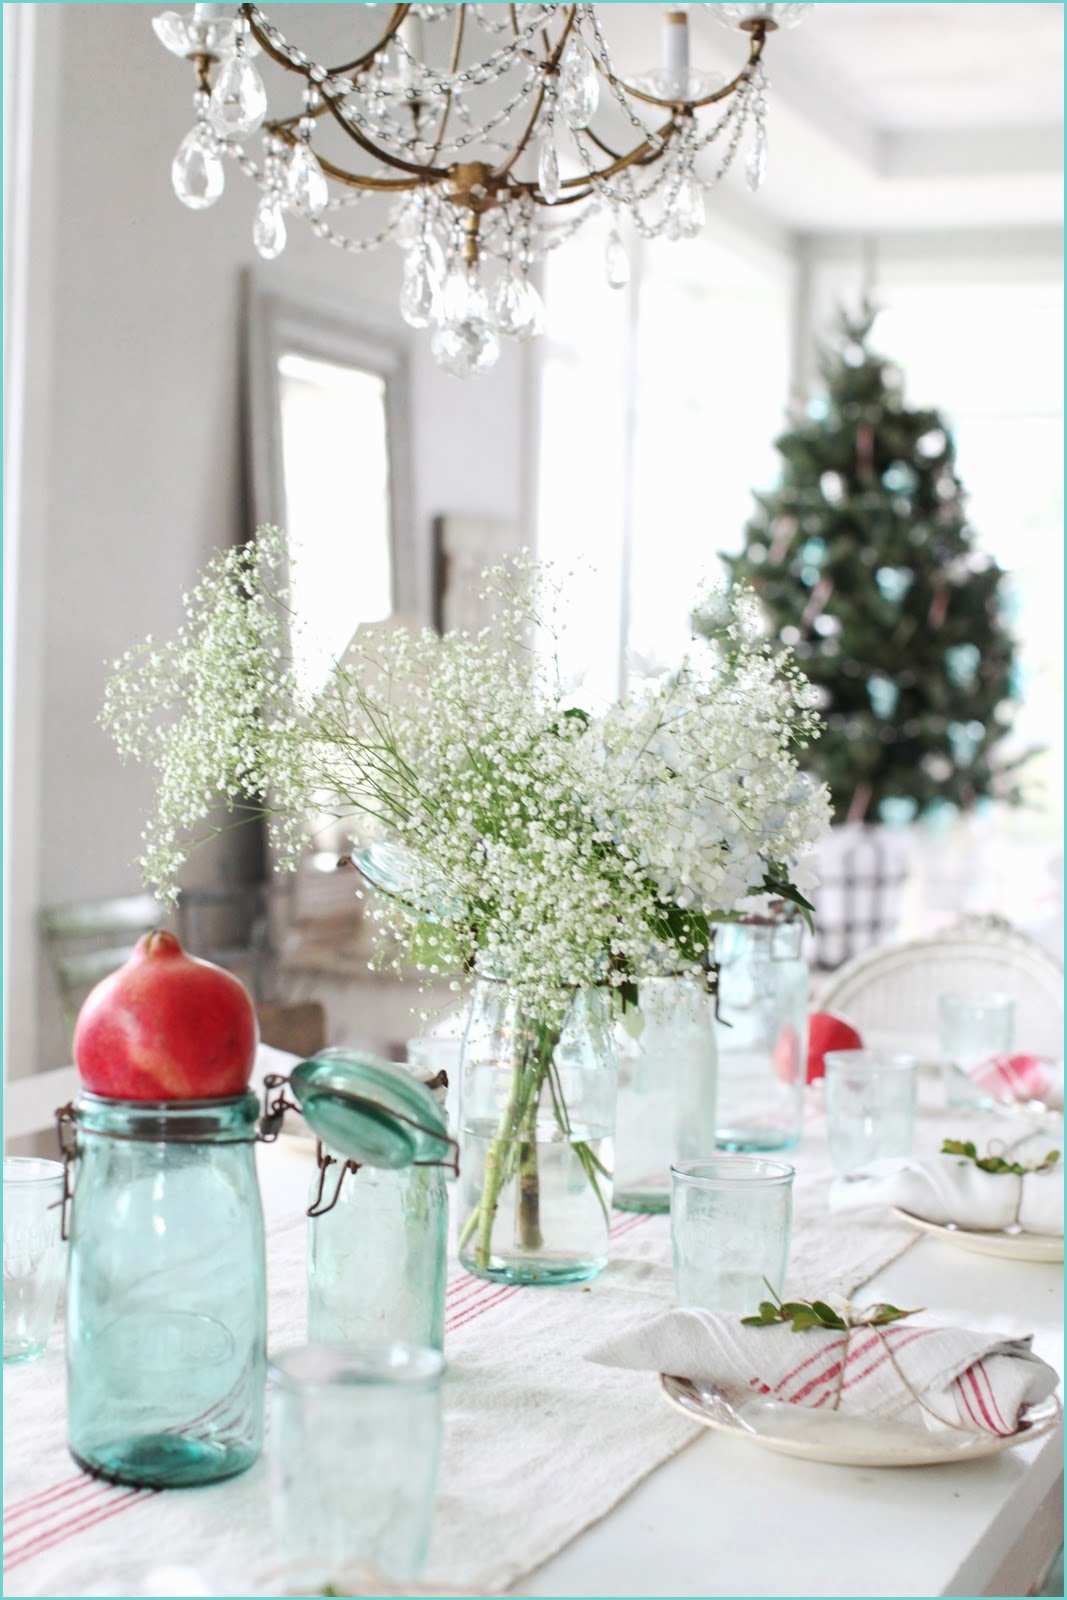 Decoration Table Noel Chic Dreamy Whites A Simple Christmas Table Setting